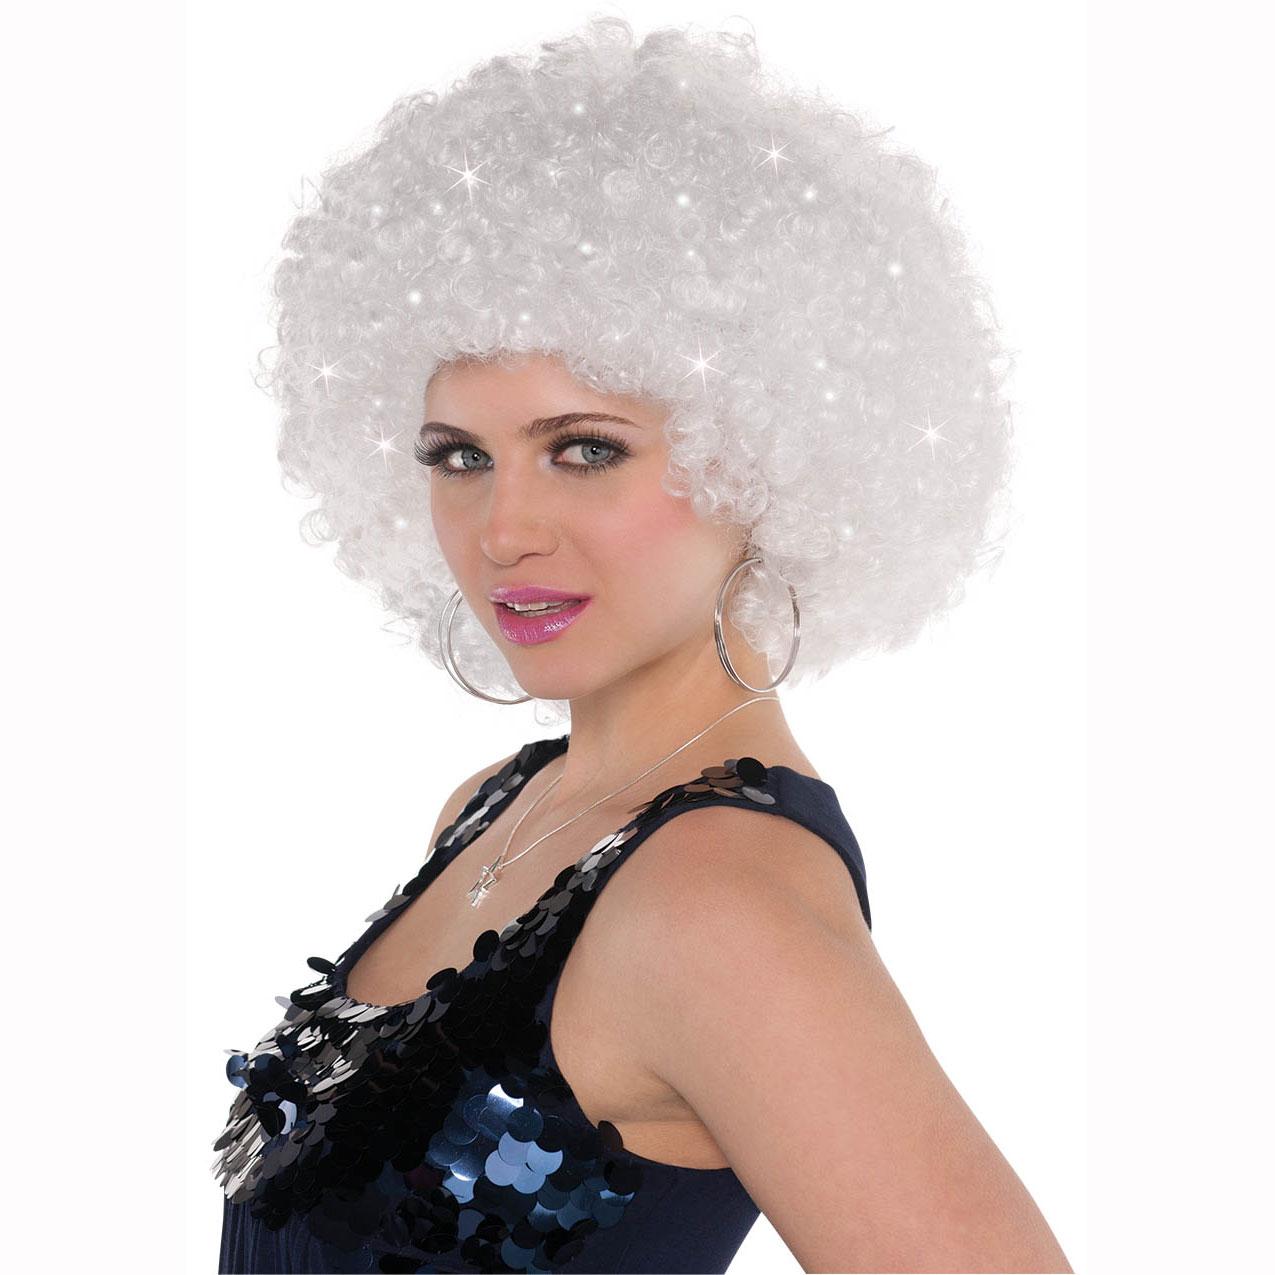 Fro Light Up Wig Costumes & Apparel - Party Centre